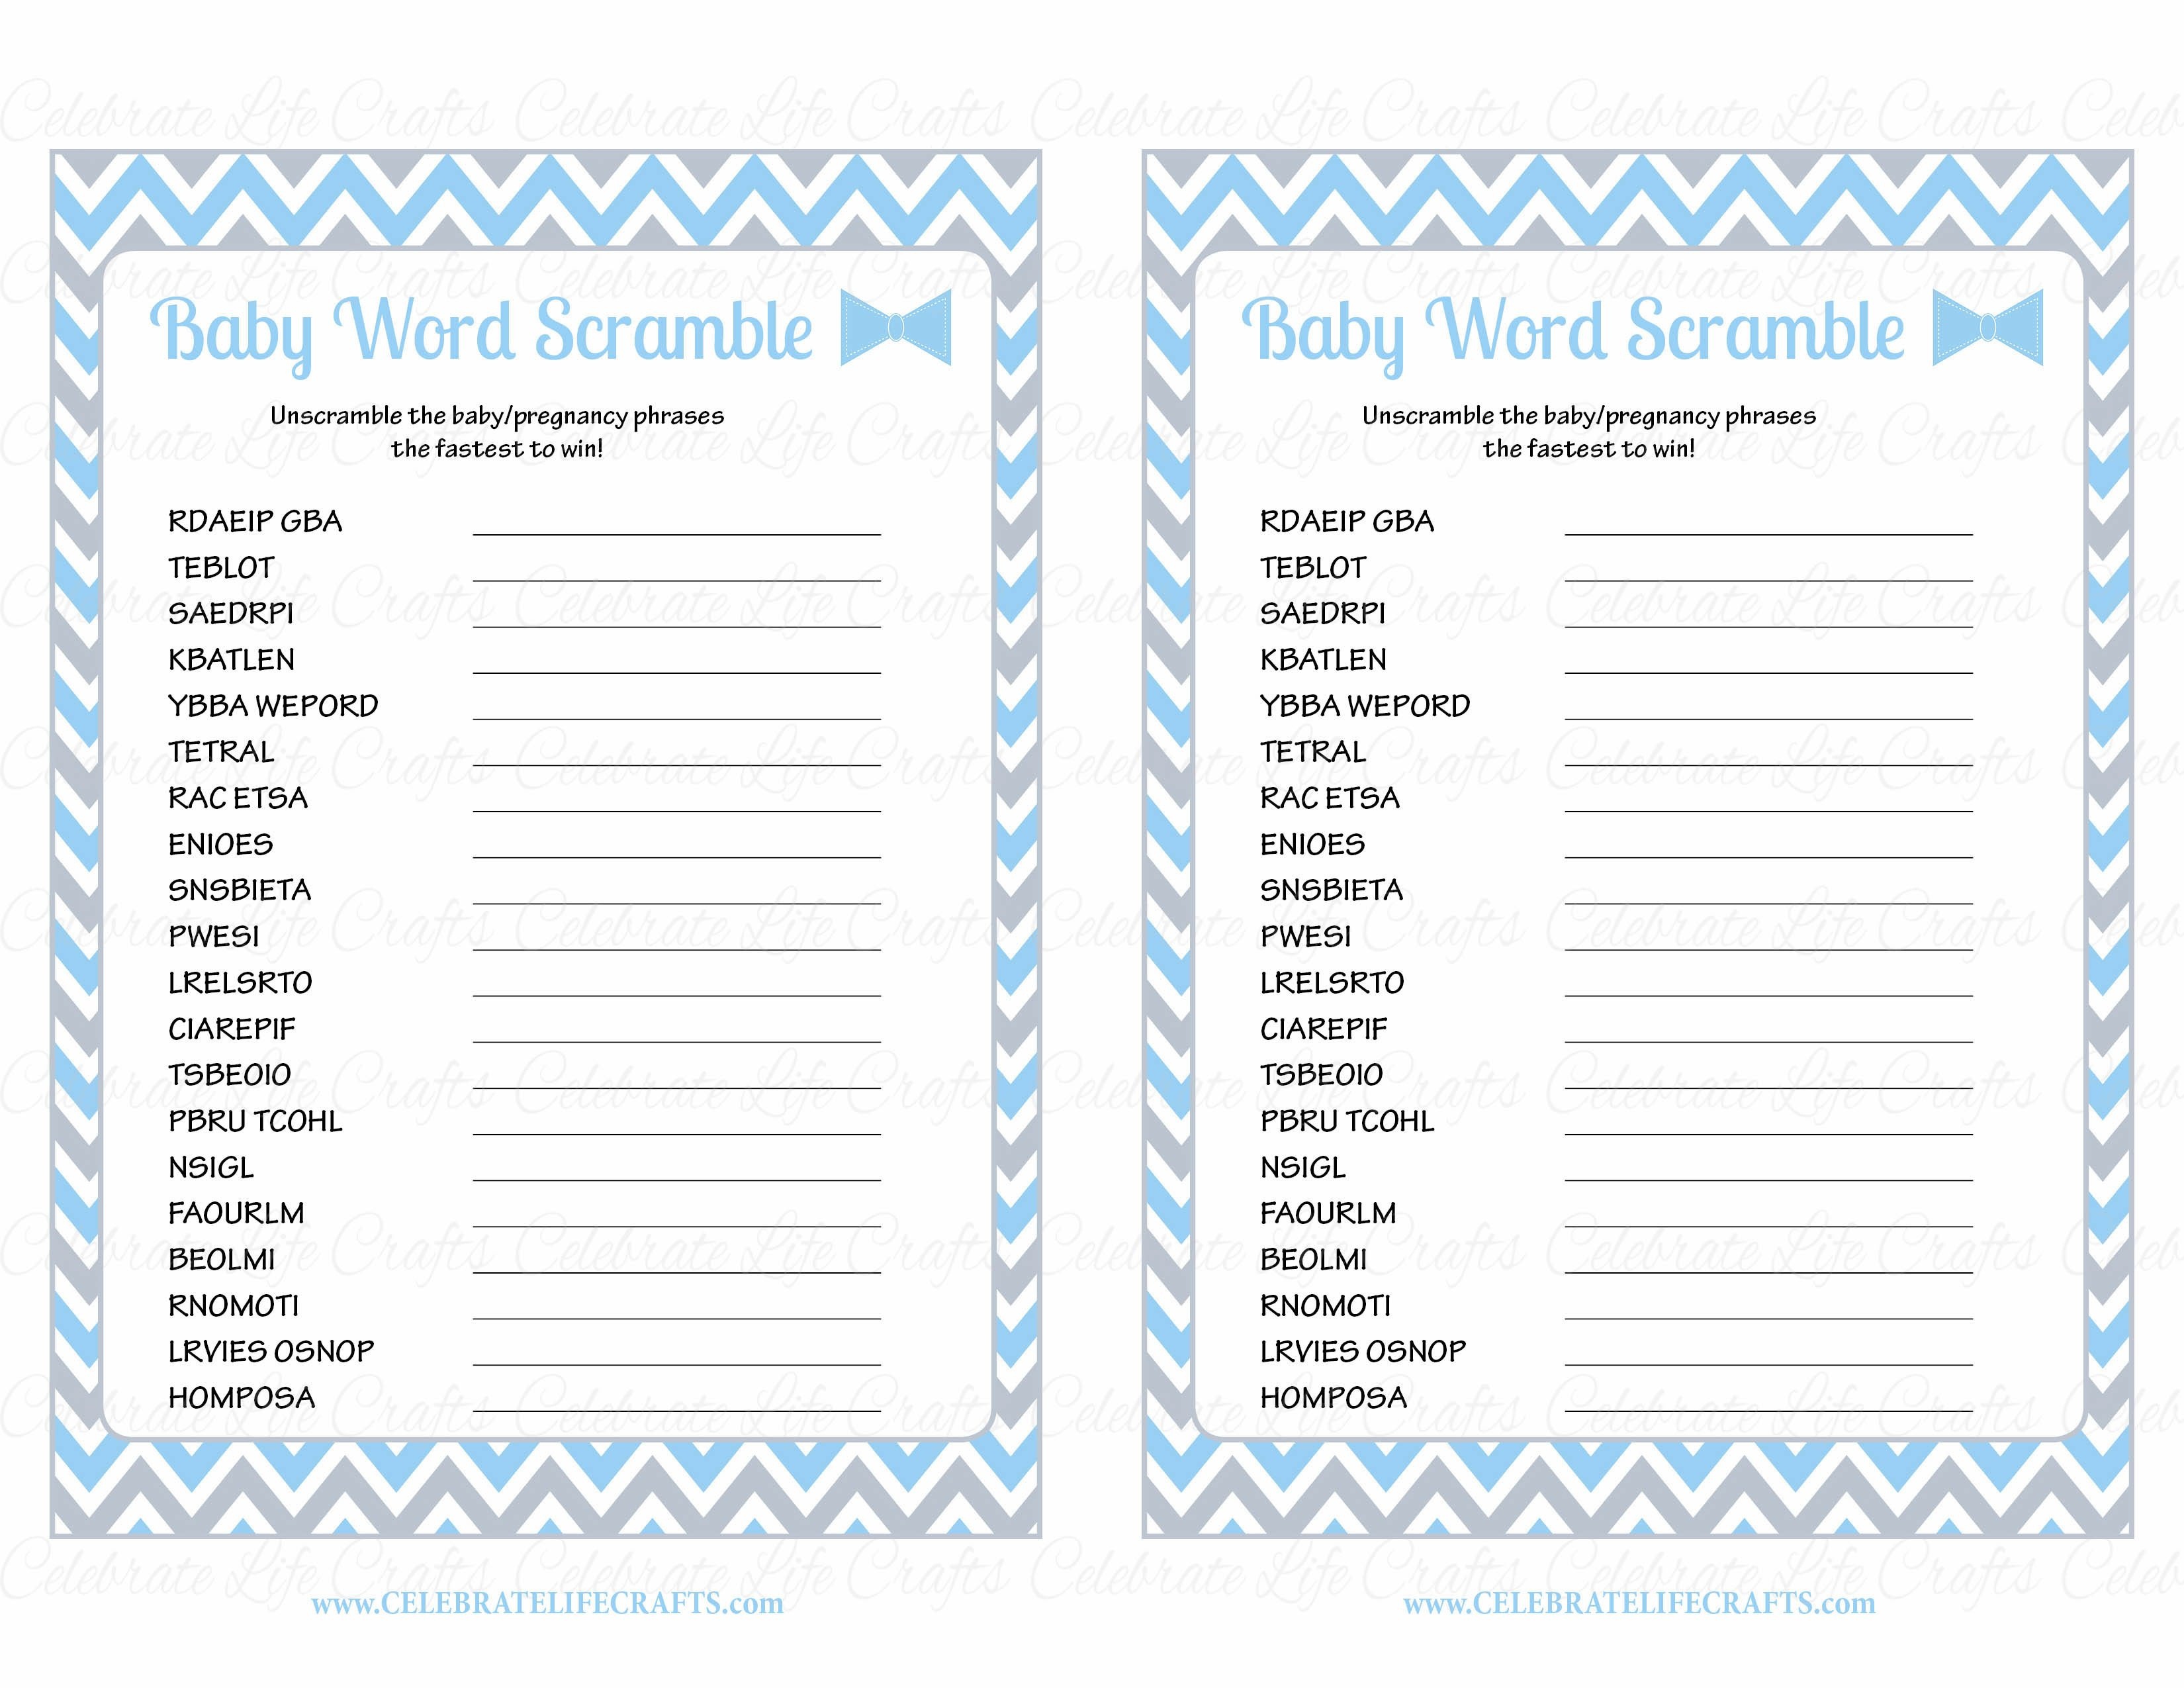 Perfect Ideas Baby Shower Games Baby Word Scramble Printable - Free Printable Baby Shower Word Scramble